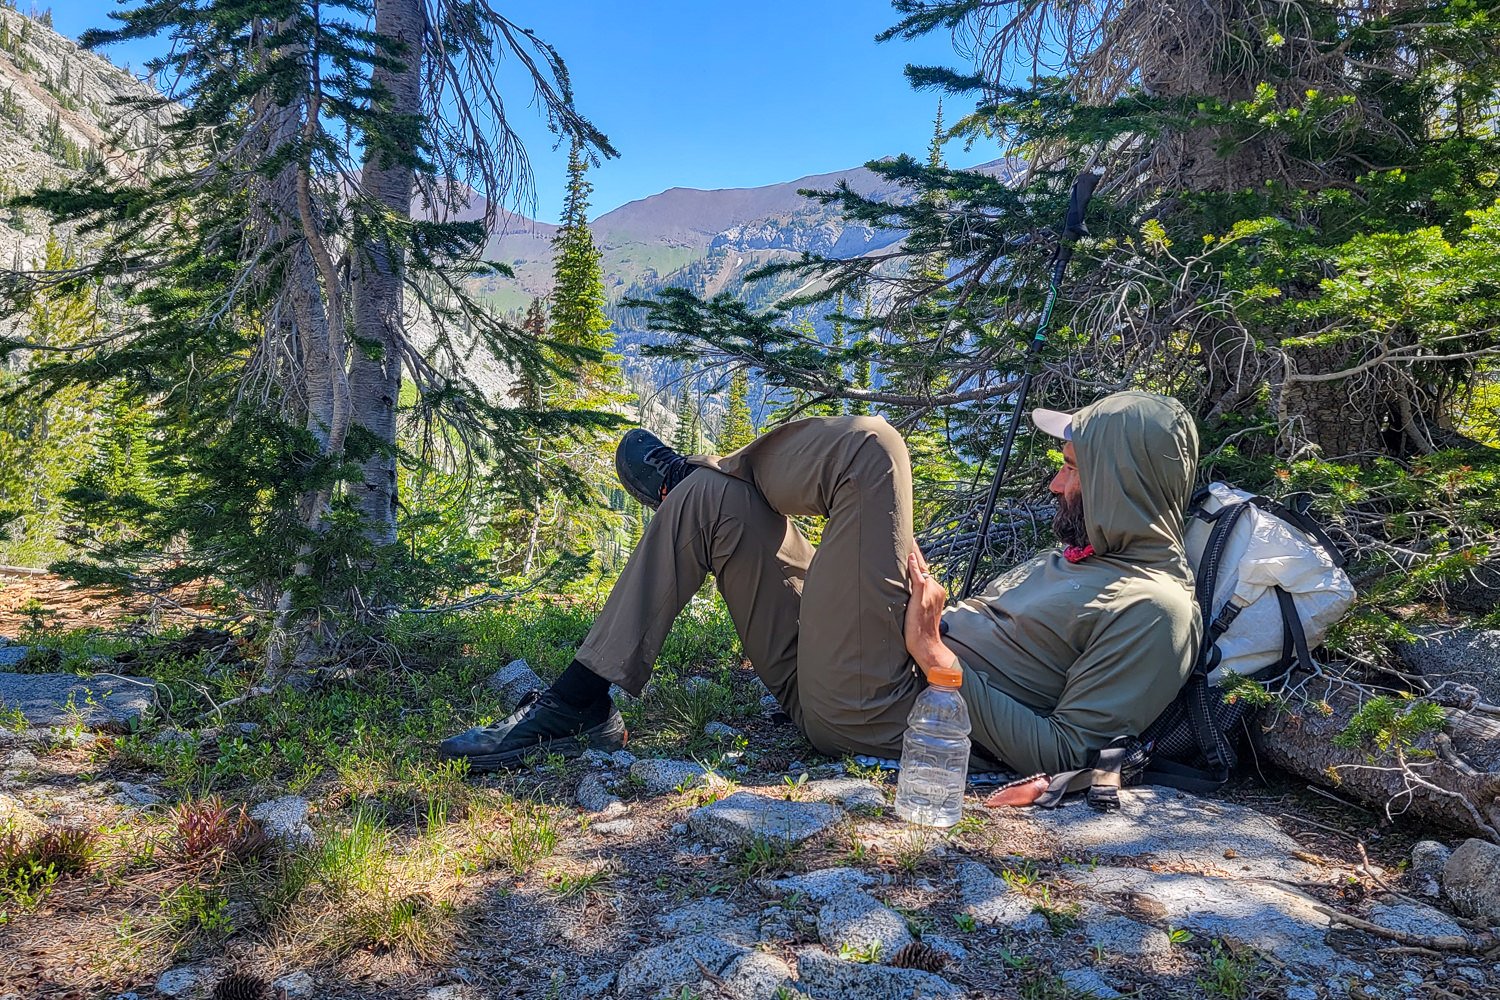 A hiker lounging against his backpack with his feet up, there